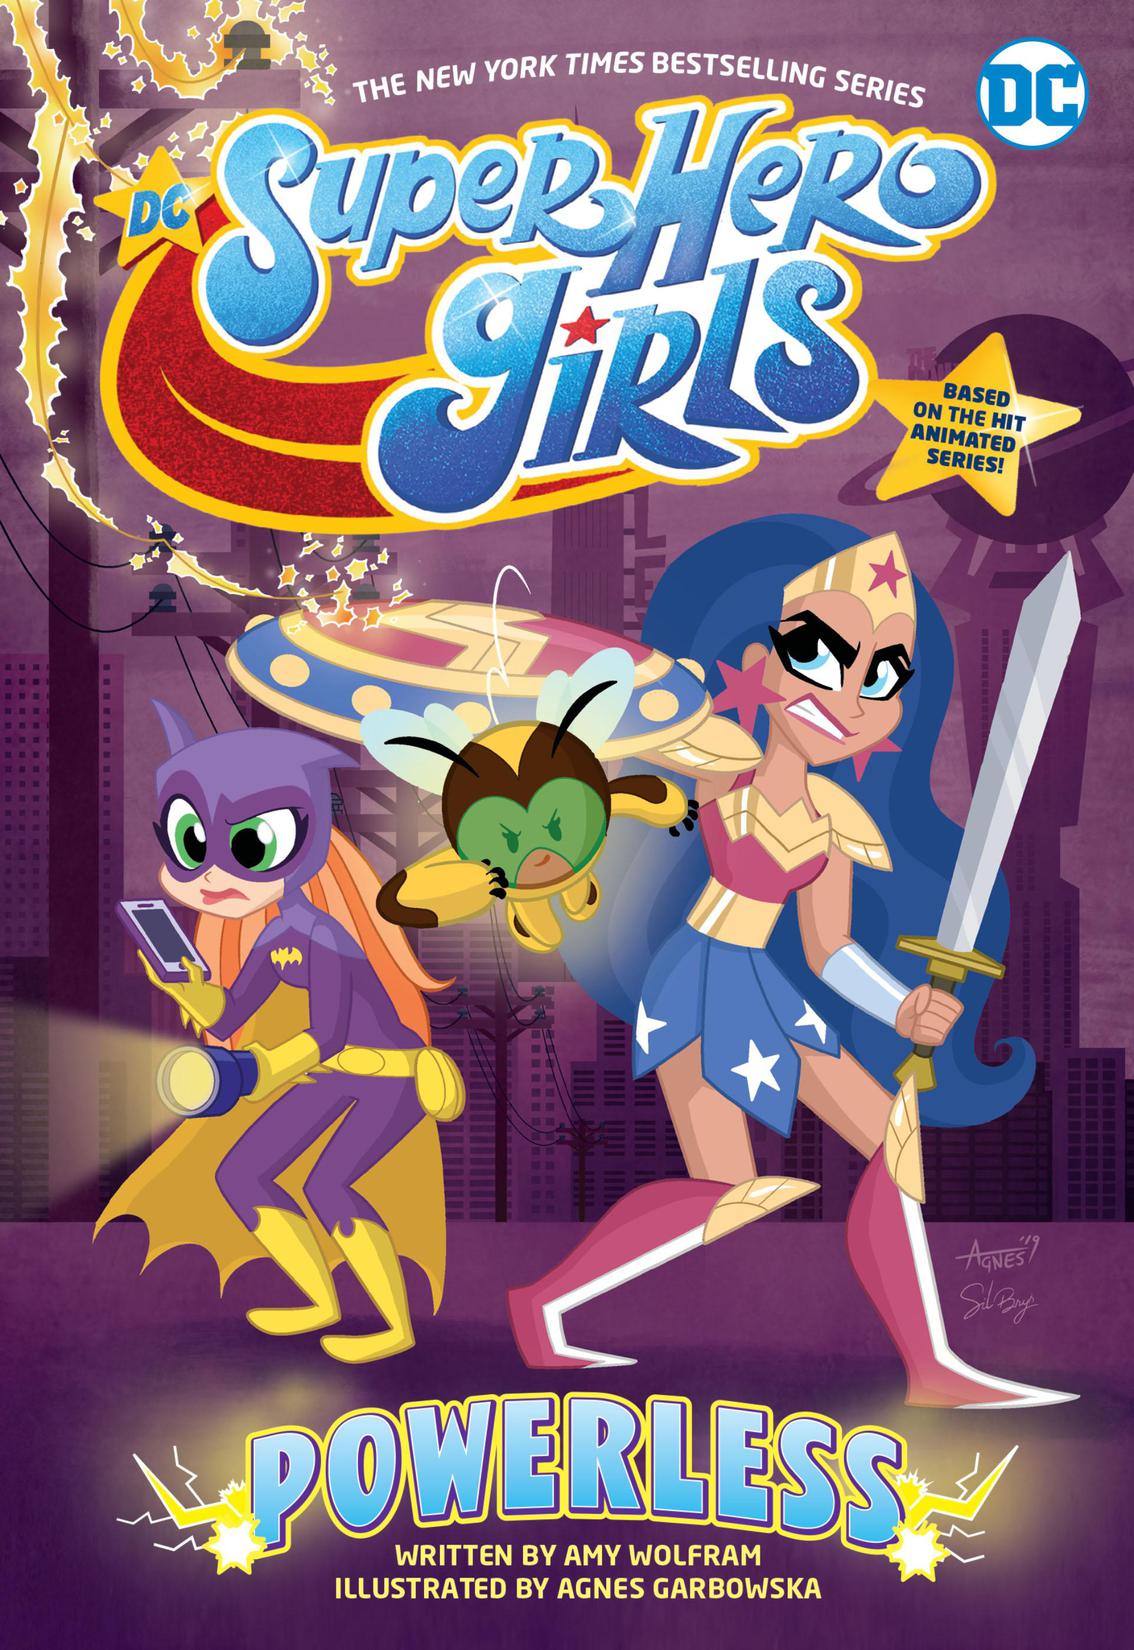 DC Super Hero Girls: Powerless preview images